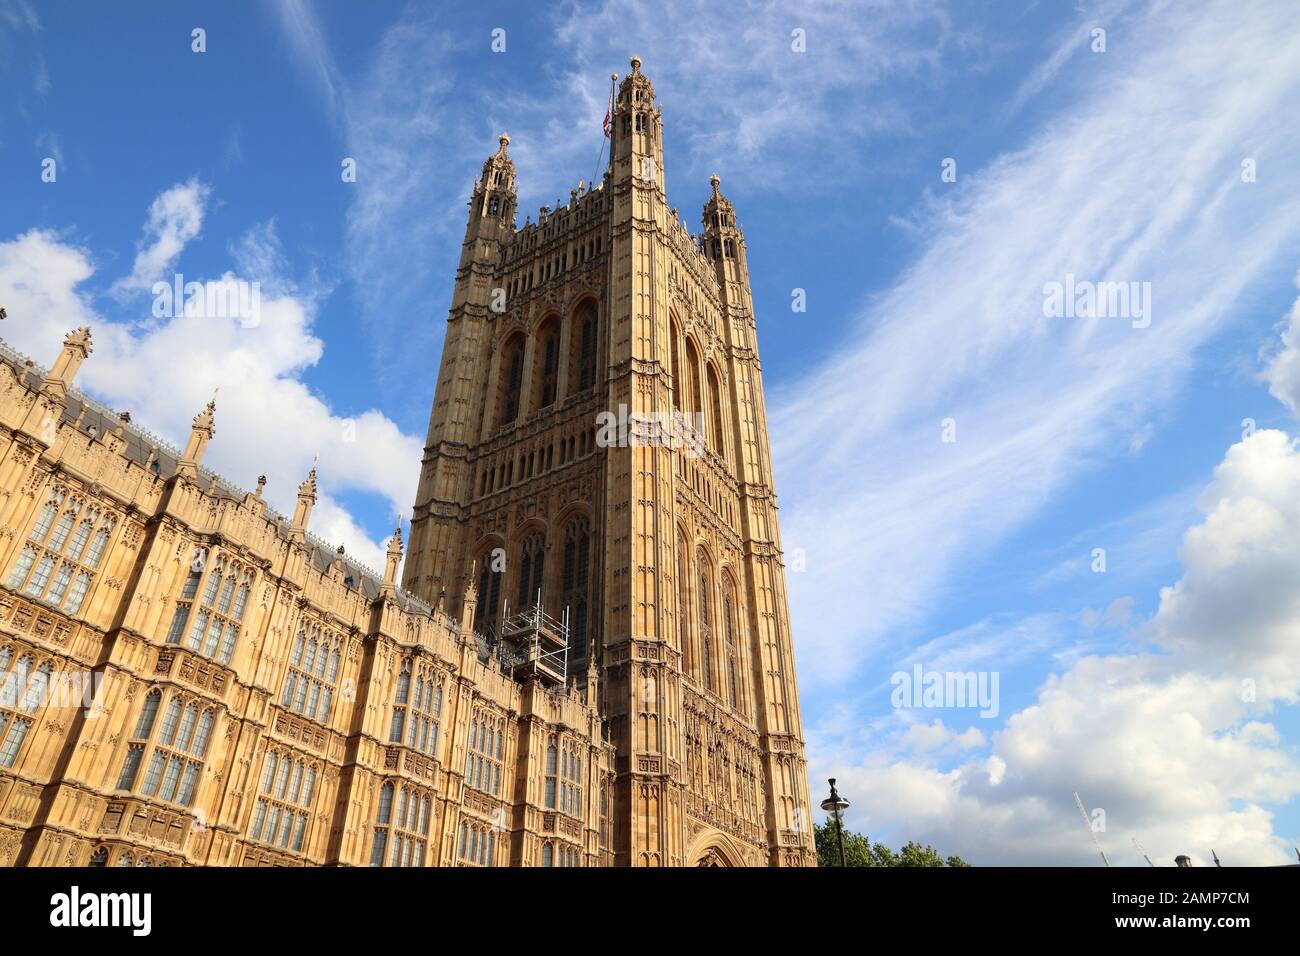 Palace of Westminster in London. Victoria Tower. Stock Photo